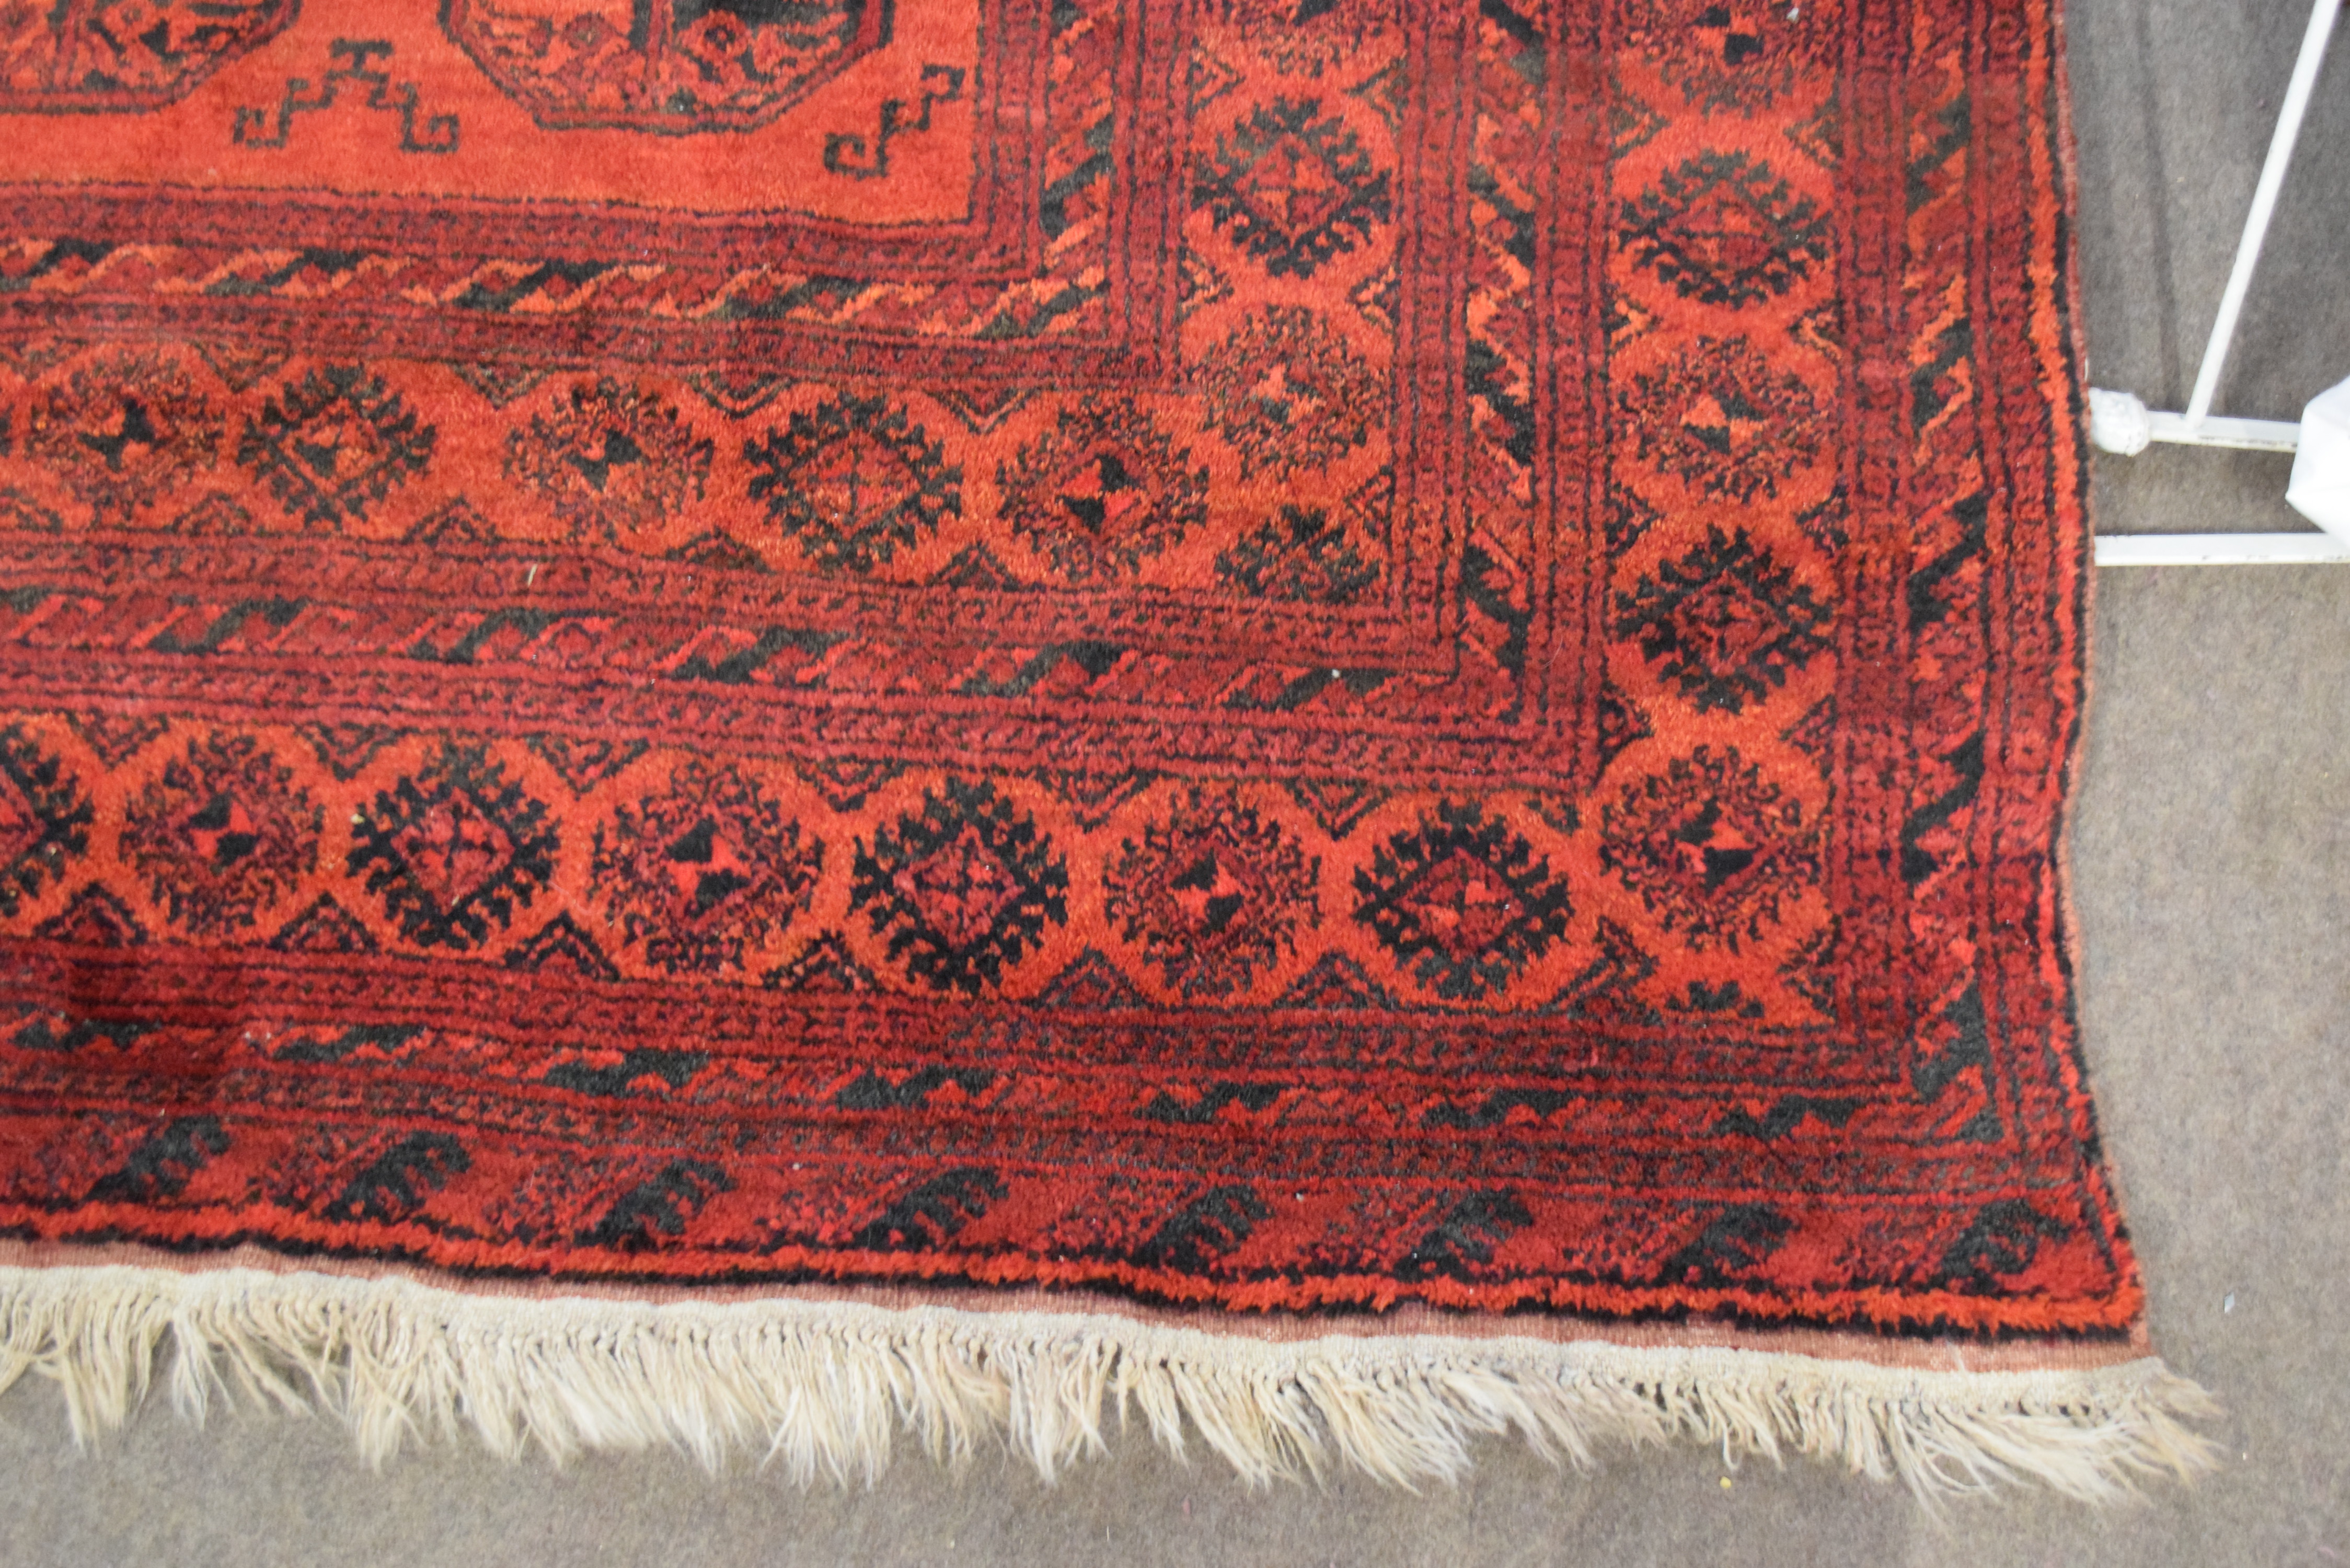 Large 20th century Bokhara type floor rug decorated with lozenges on a red background with a - Image 6 of 8